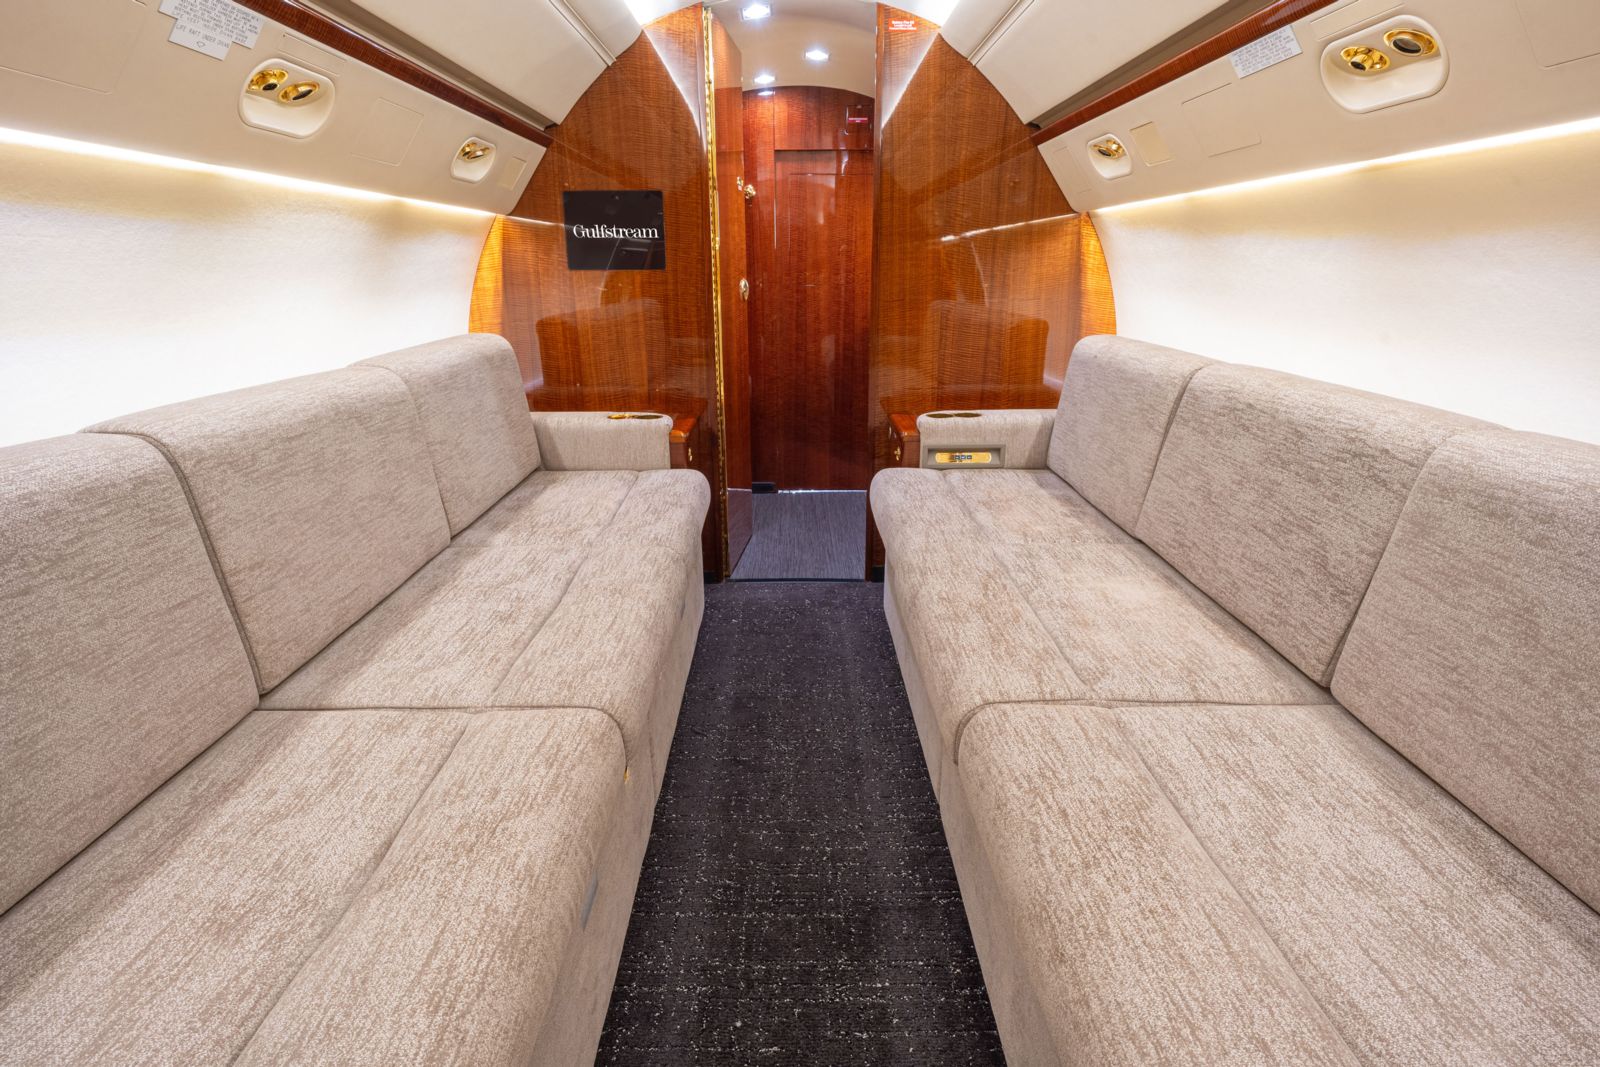 Gulfstream GIVSP  S/N 1492 for sale | gallery image: /userfiles/files/03_givsp_sn1492_m-07968.jpg